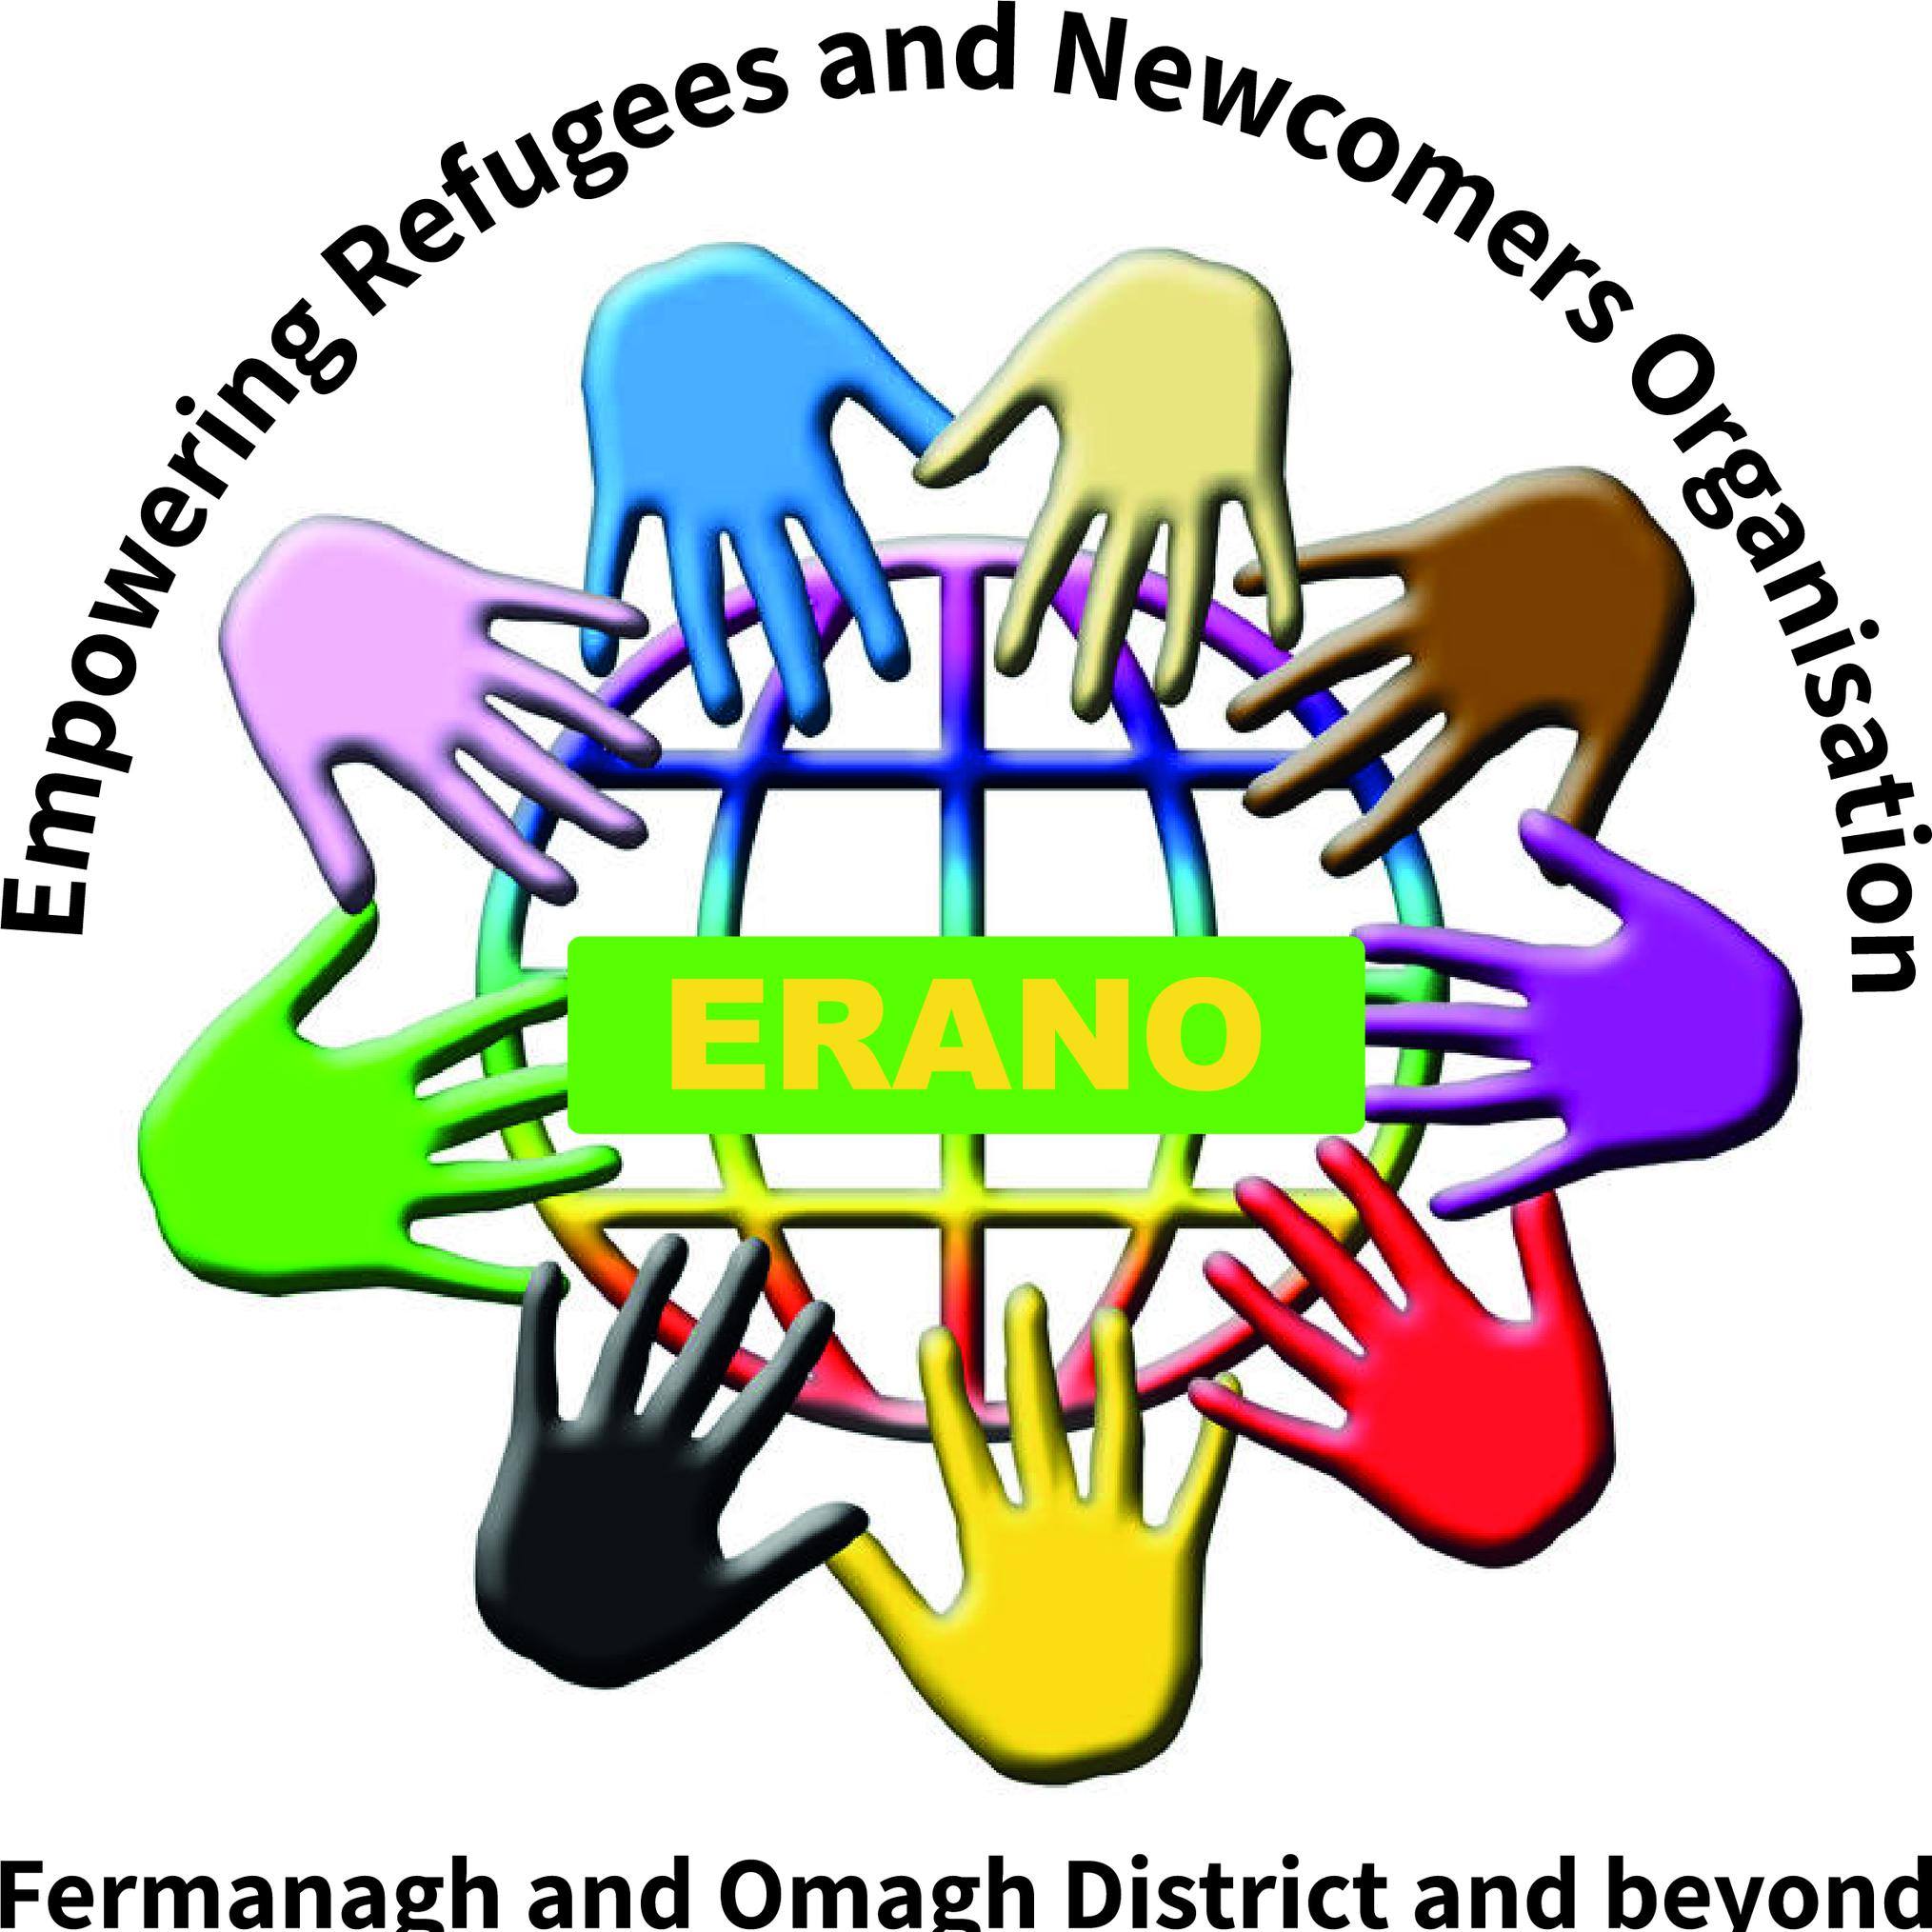 ERANO (Empowering Refugees and Newcomers Organisation)